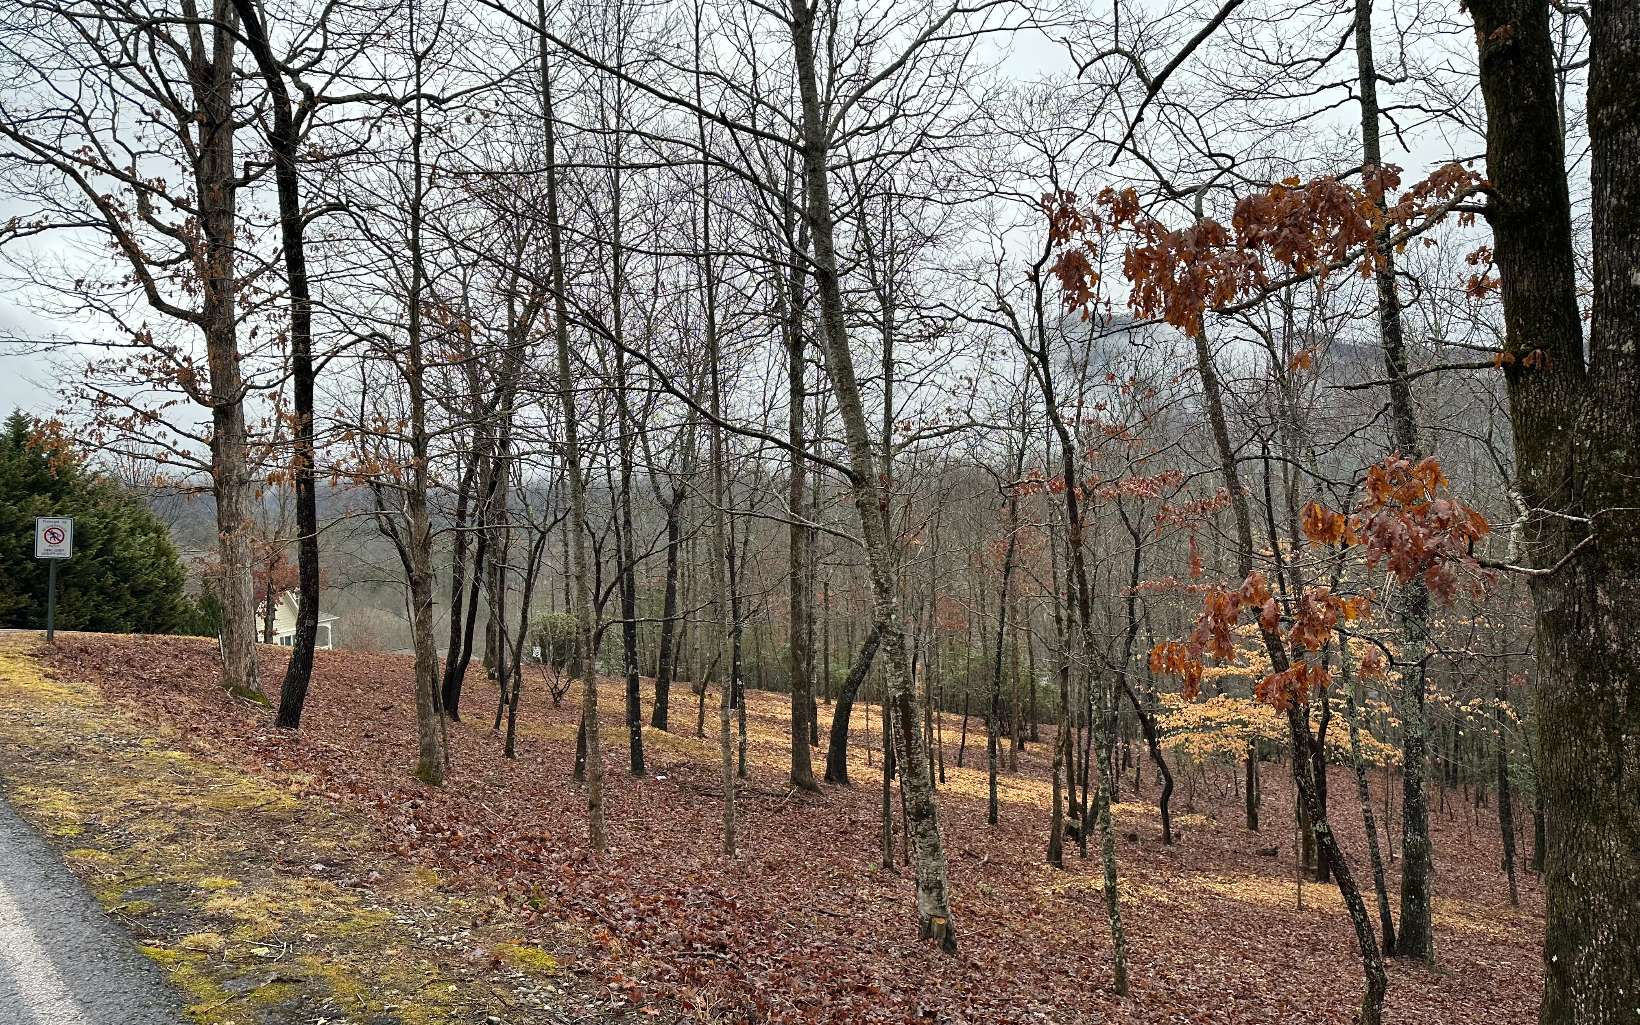 This is ONE OF THE BEST Subdivisions in Young Harris, GA! Gentle Lot, Easy to Build on, Good Access & Great Views! Very Close to Brasstown Valley Resort & Young Harris College. Come and take a look at this Great Lot Located in a Beautiful Neighborhood with Beautiful Homes!